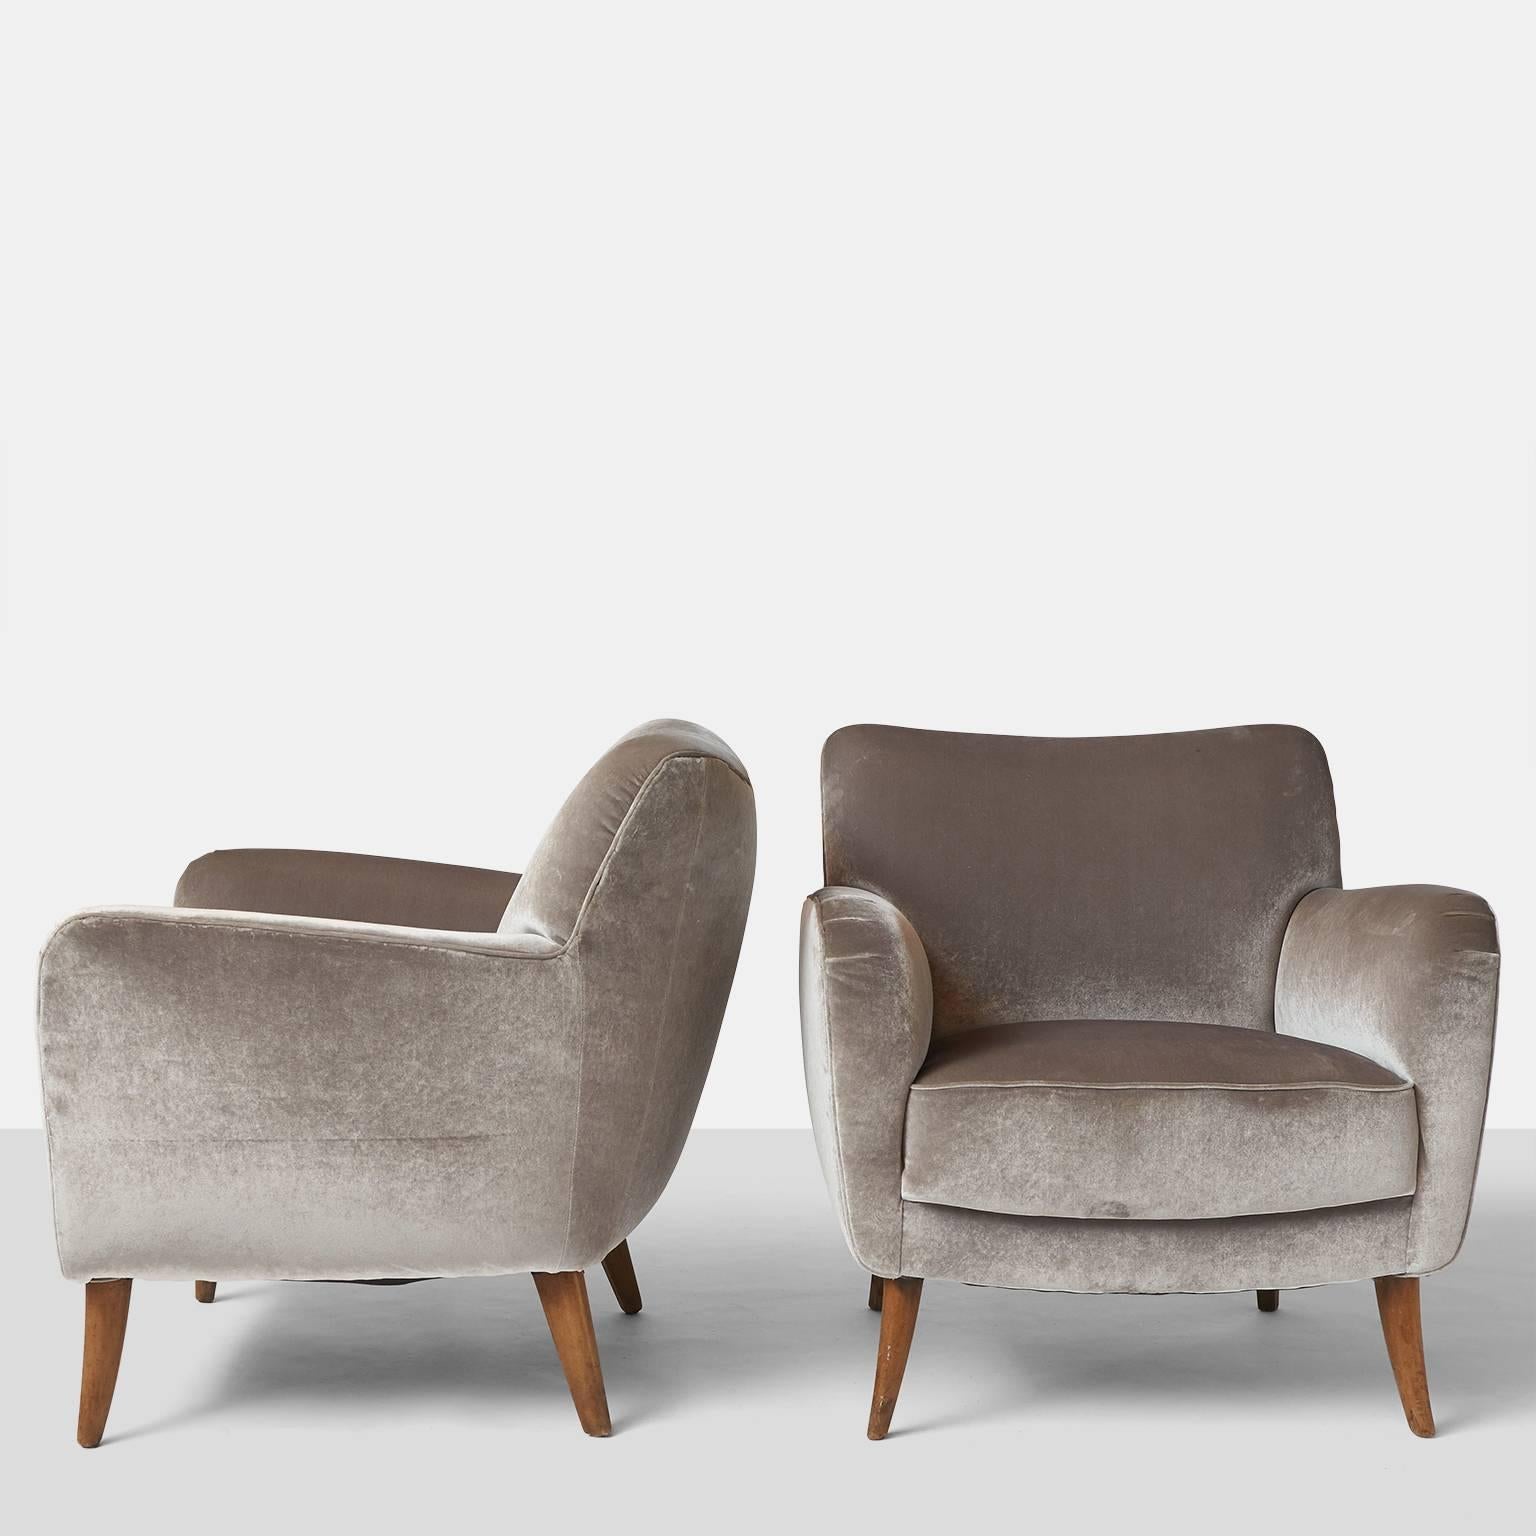 A pair of club chairs designed by awarded Italian Architect Giorgio Ramponi and upholstered in a gray velvet fabric.
Published in Mobili Tipo, Roberto Aloi, Hoepli Edition 1950.